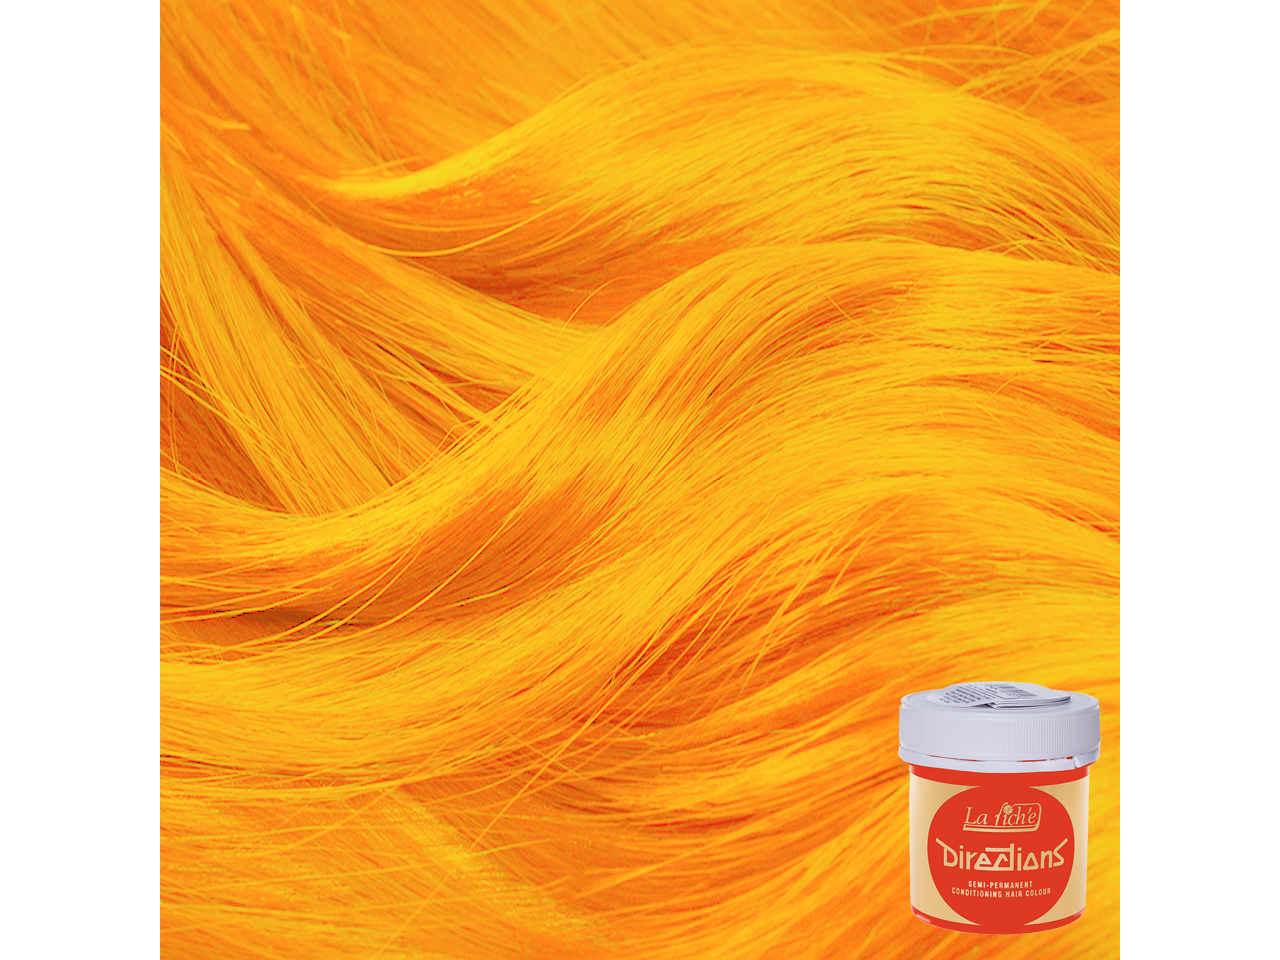 Apricot Blonde Hair Dye Options - wide 2